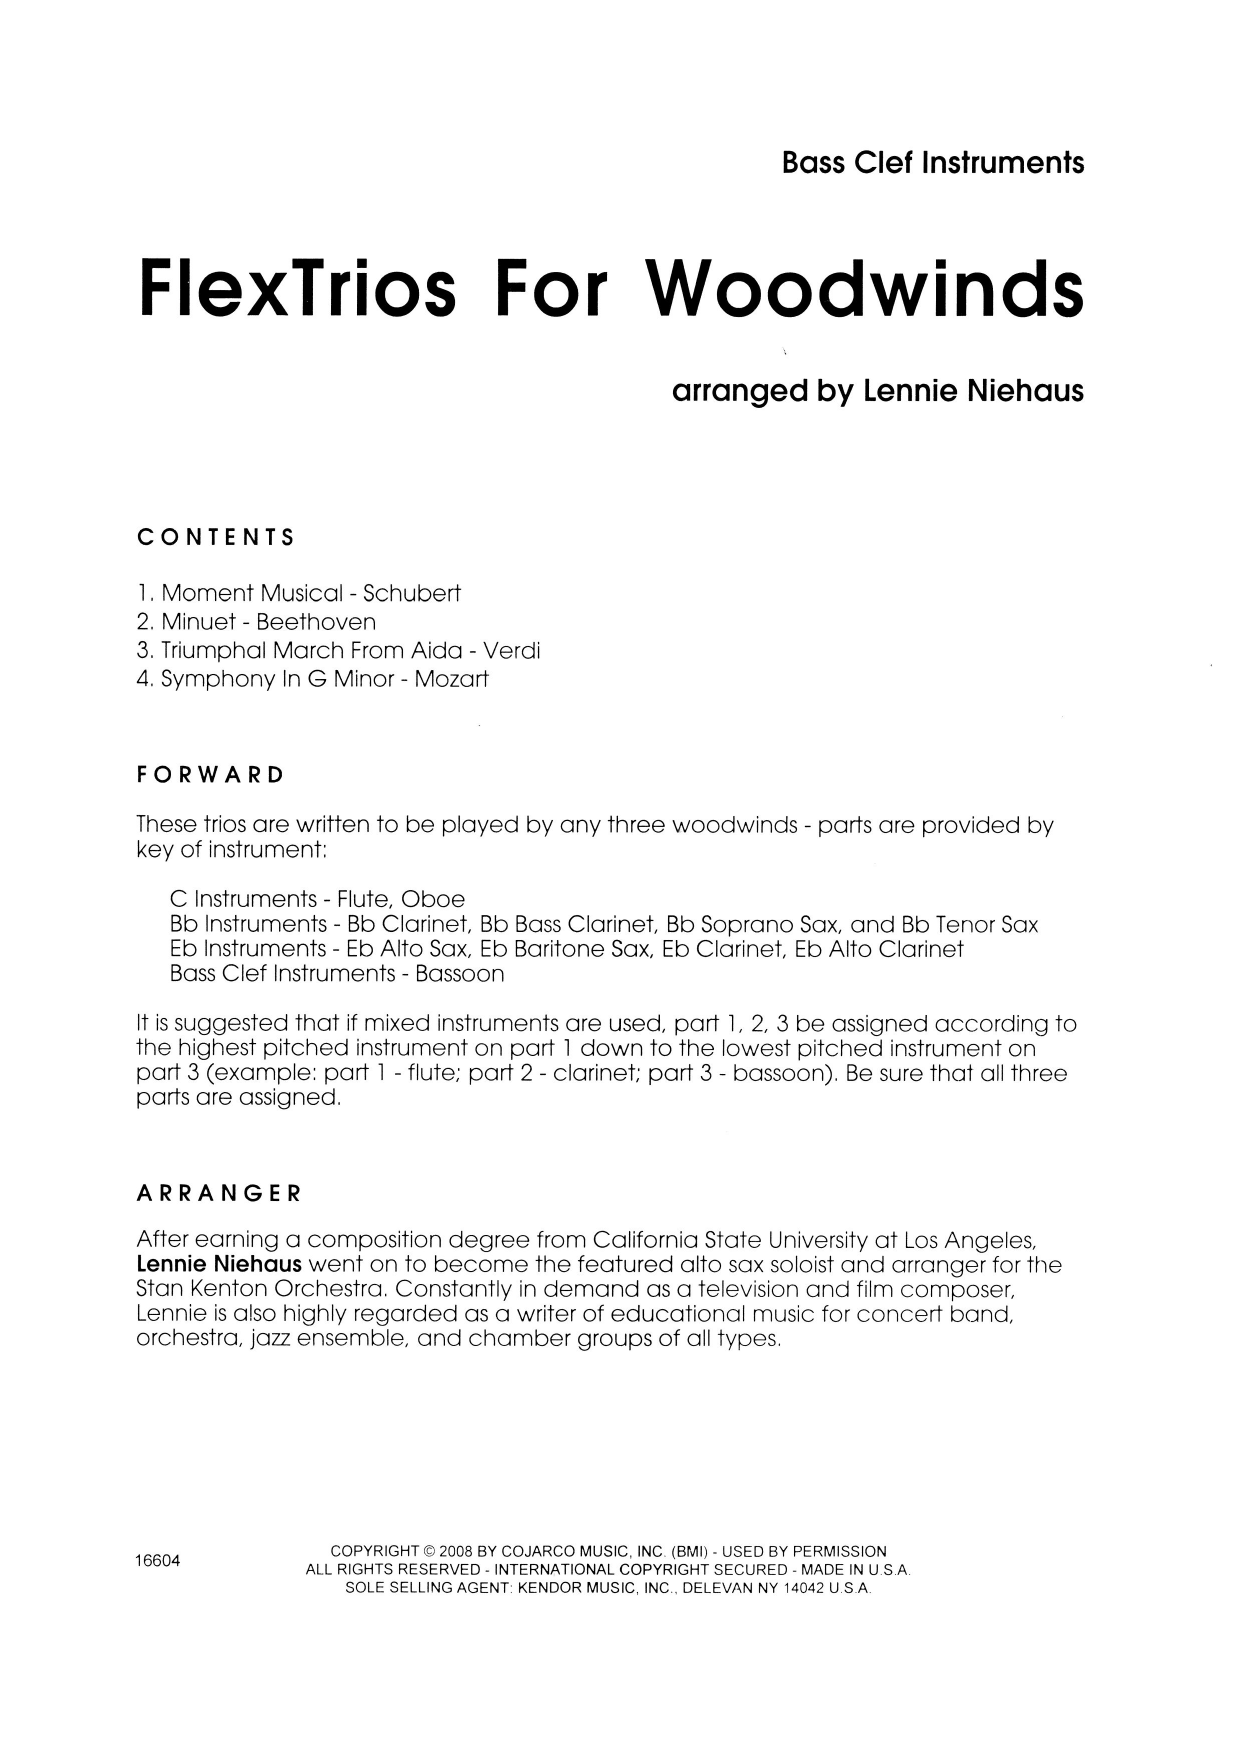 FlexTrios For Woodwinds (playable by any three woodwind instruments) - C Bass Clef Soloist (Woodwind Ensemble) von Lennie Niehaus